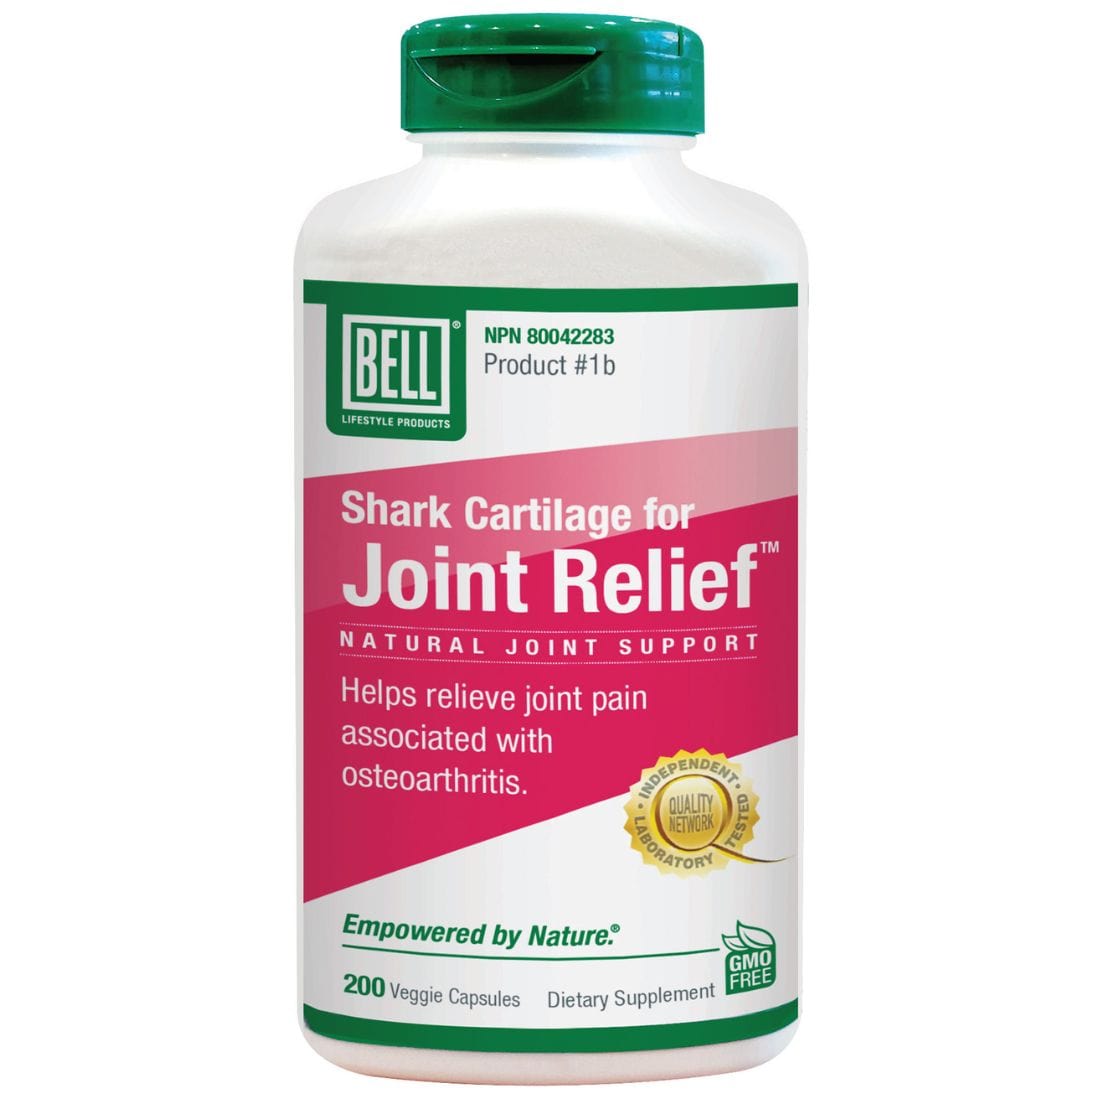 200 Capsules | Bell Shark Cartilage for Joint Relief 